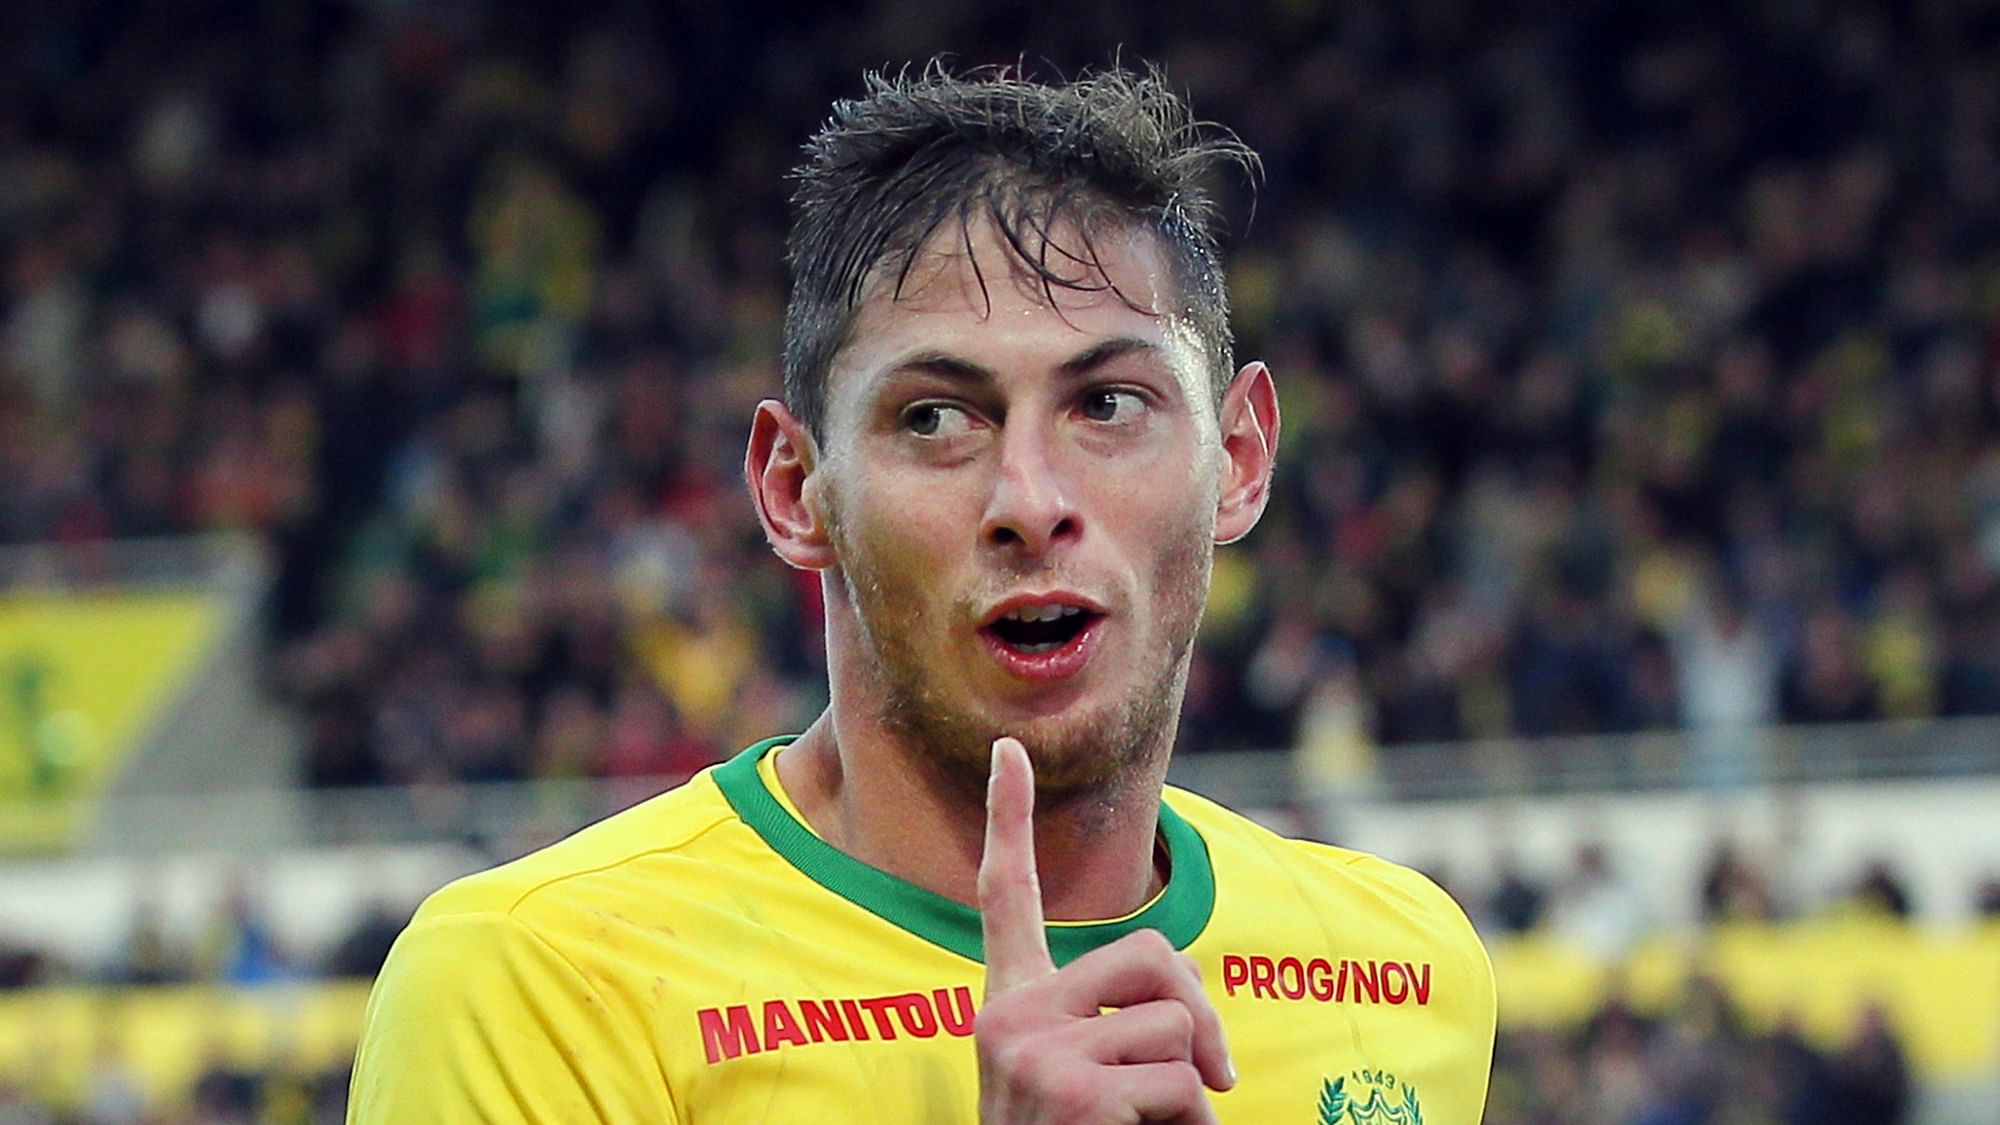 In this his file photo taken on Nov. 4, 2018, Argentine soccer player, Emiliano Sala, of the FC Nantes club, western France, reacts after scoring during a soccer match against Guingam, in Nantes, France.&nbsp;